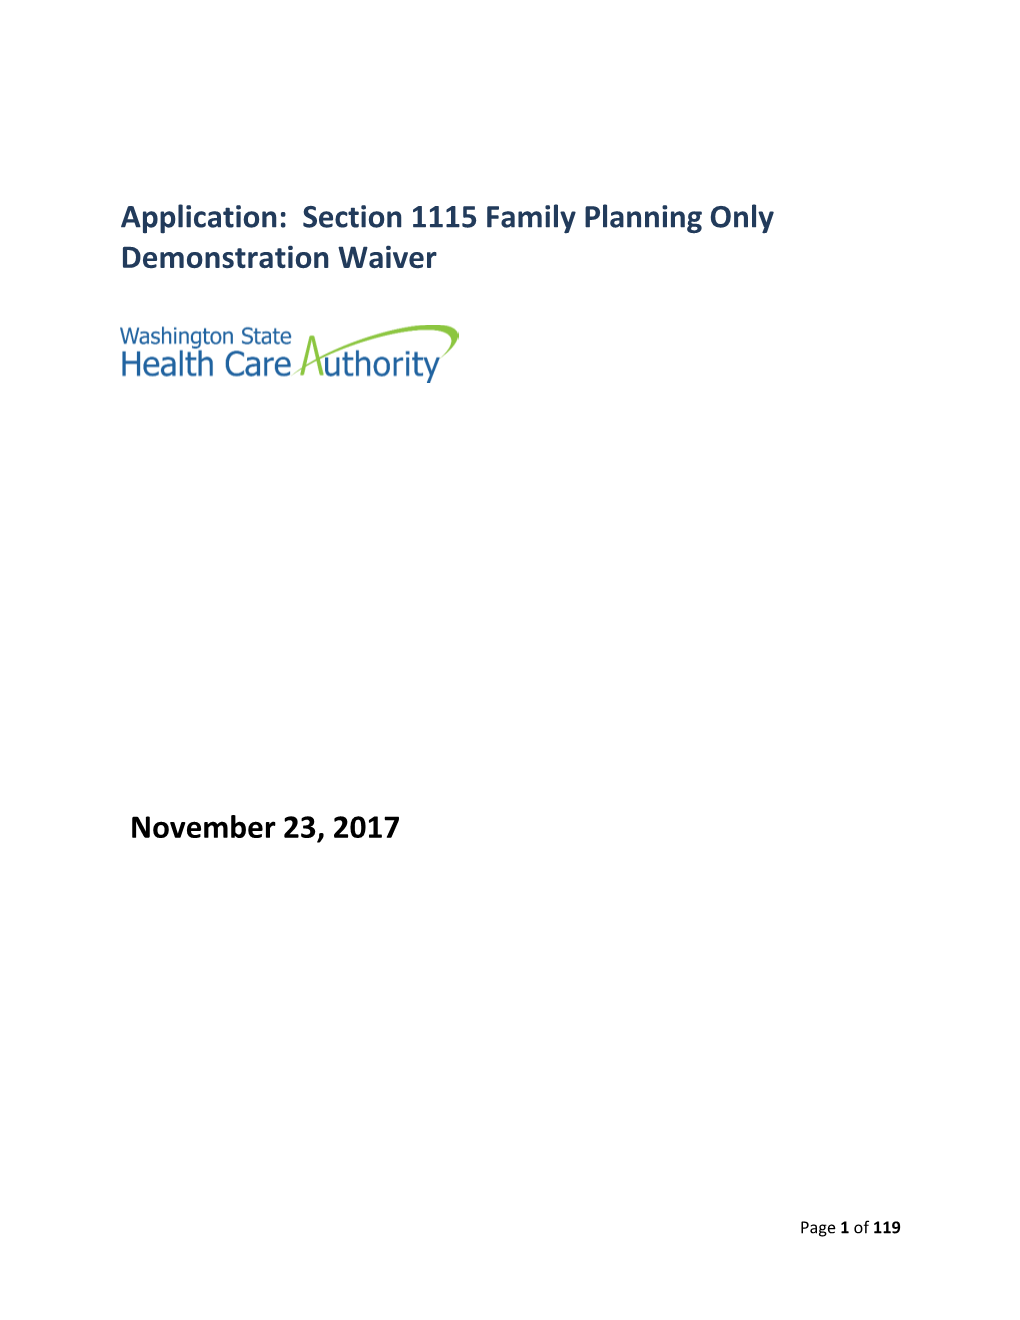 Application: Section 1115 Family Planning Only Demonstration Waiver